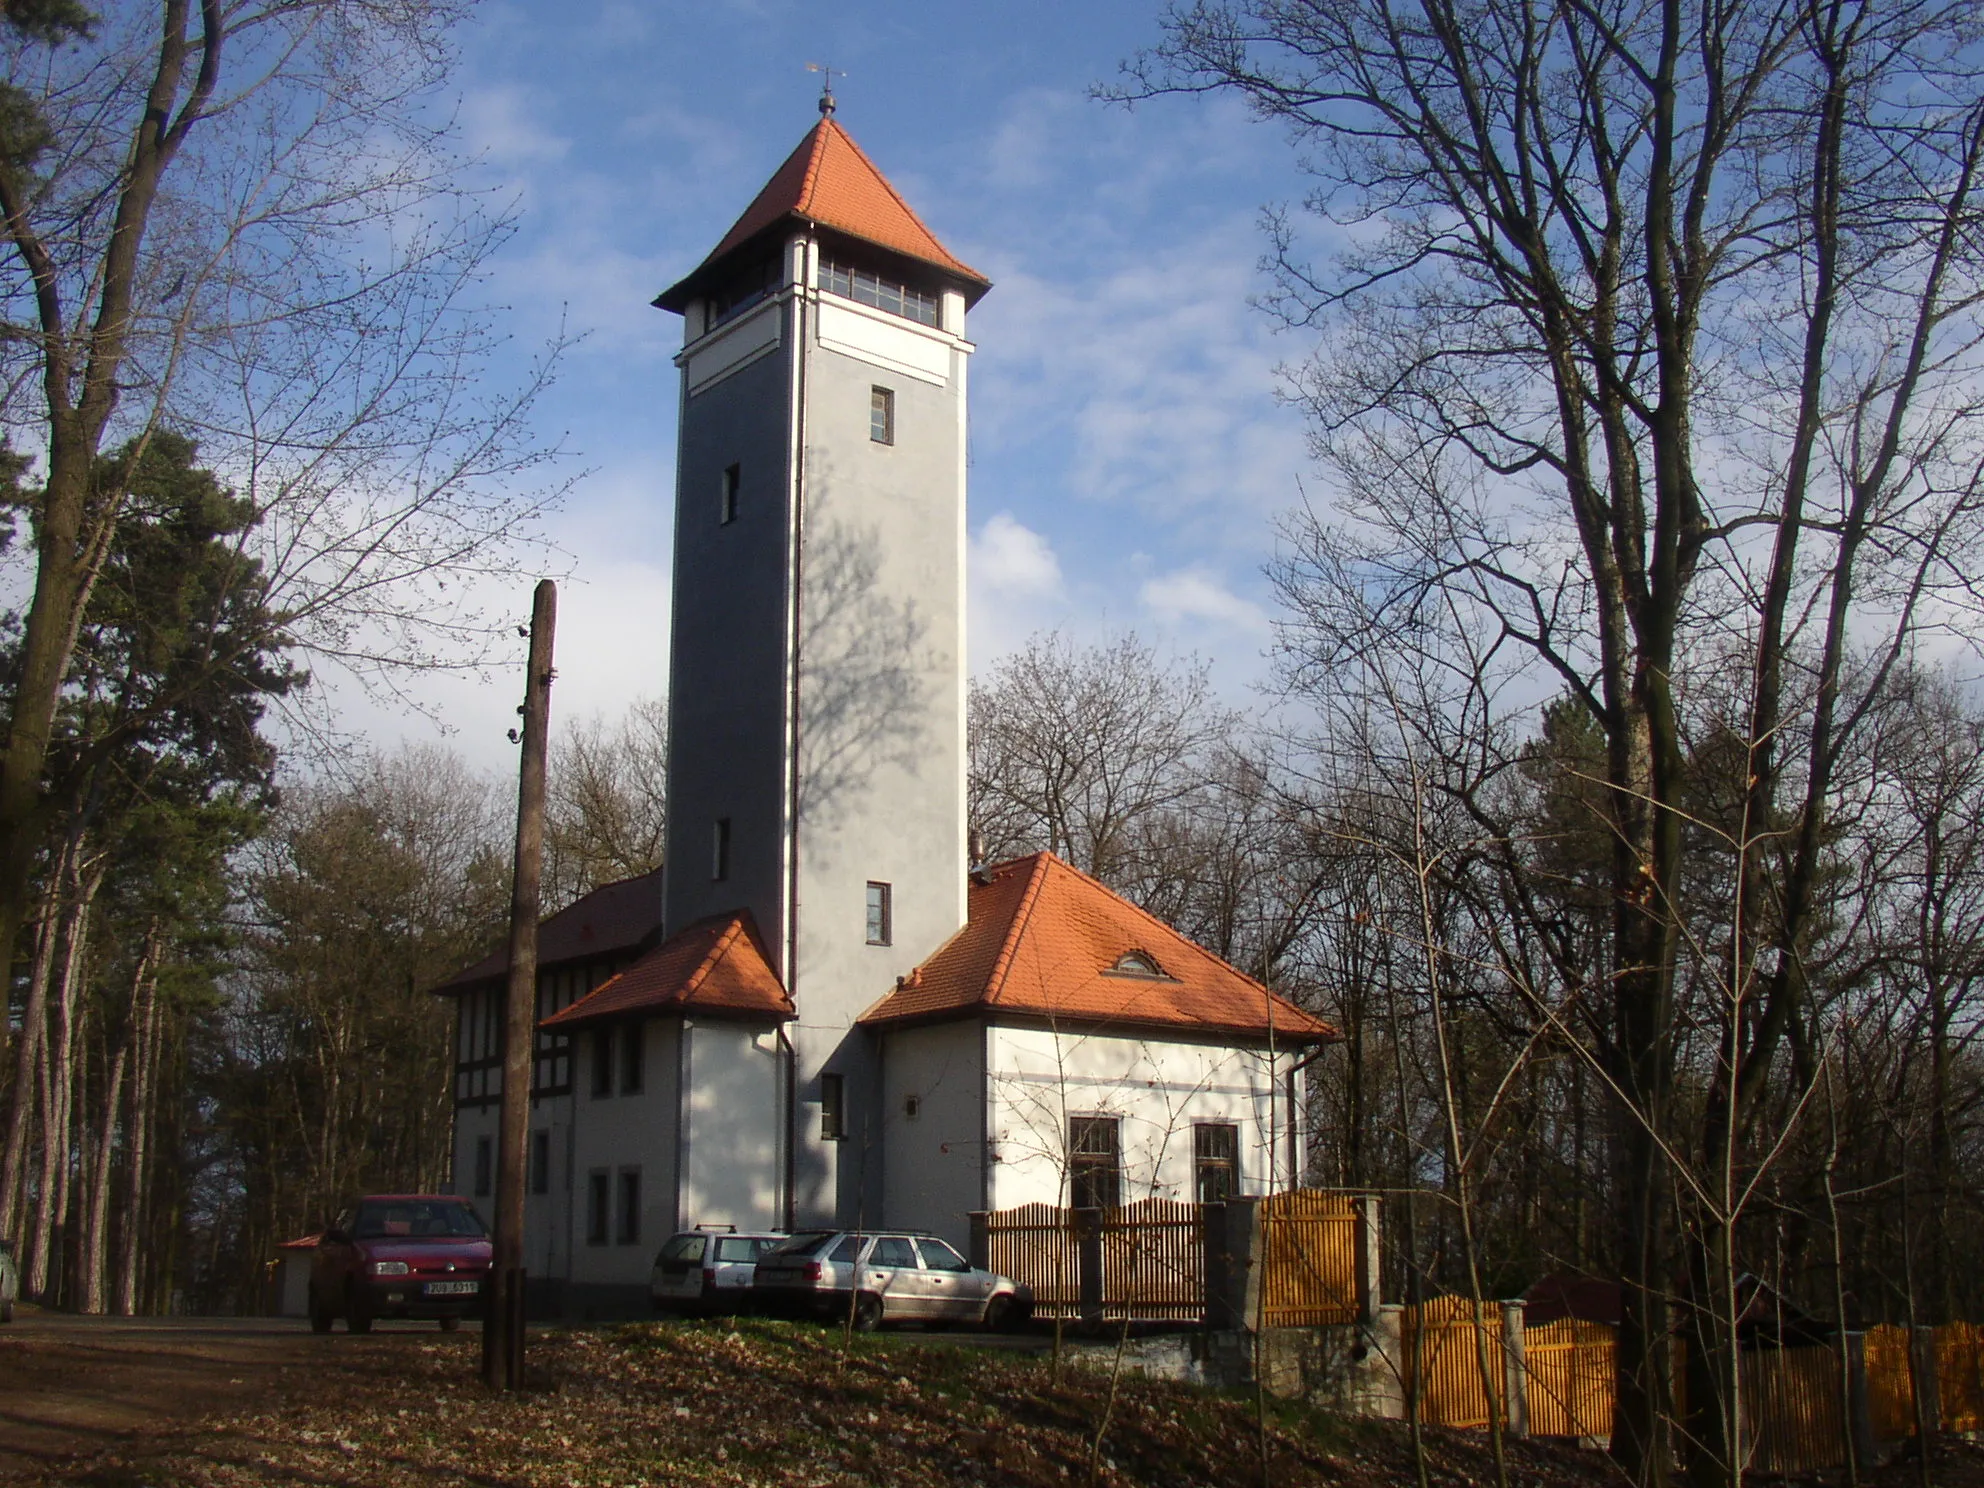 Photo showing: Restaurant and lookout tower at Mostná hora (Bridge Hill) in Litoměřice, Czech Republic.